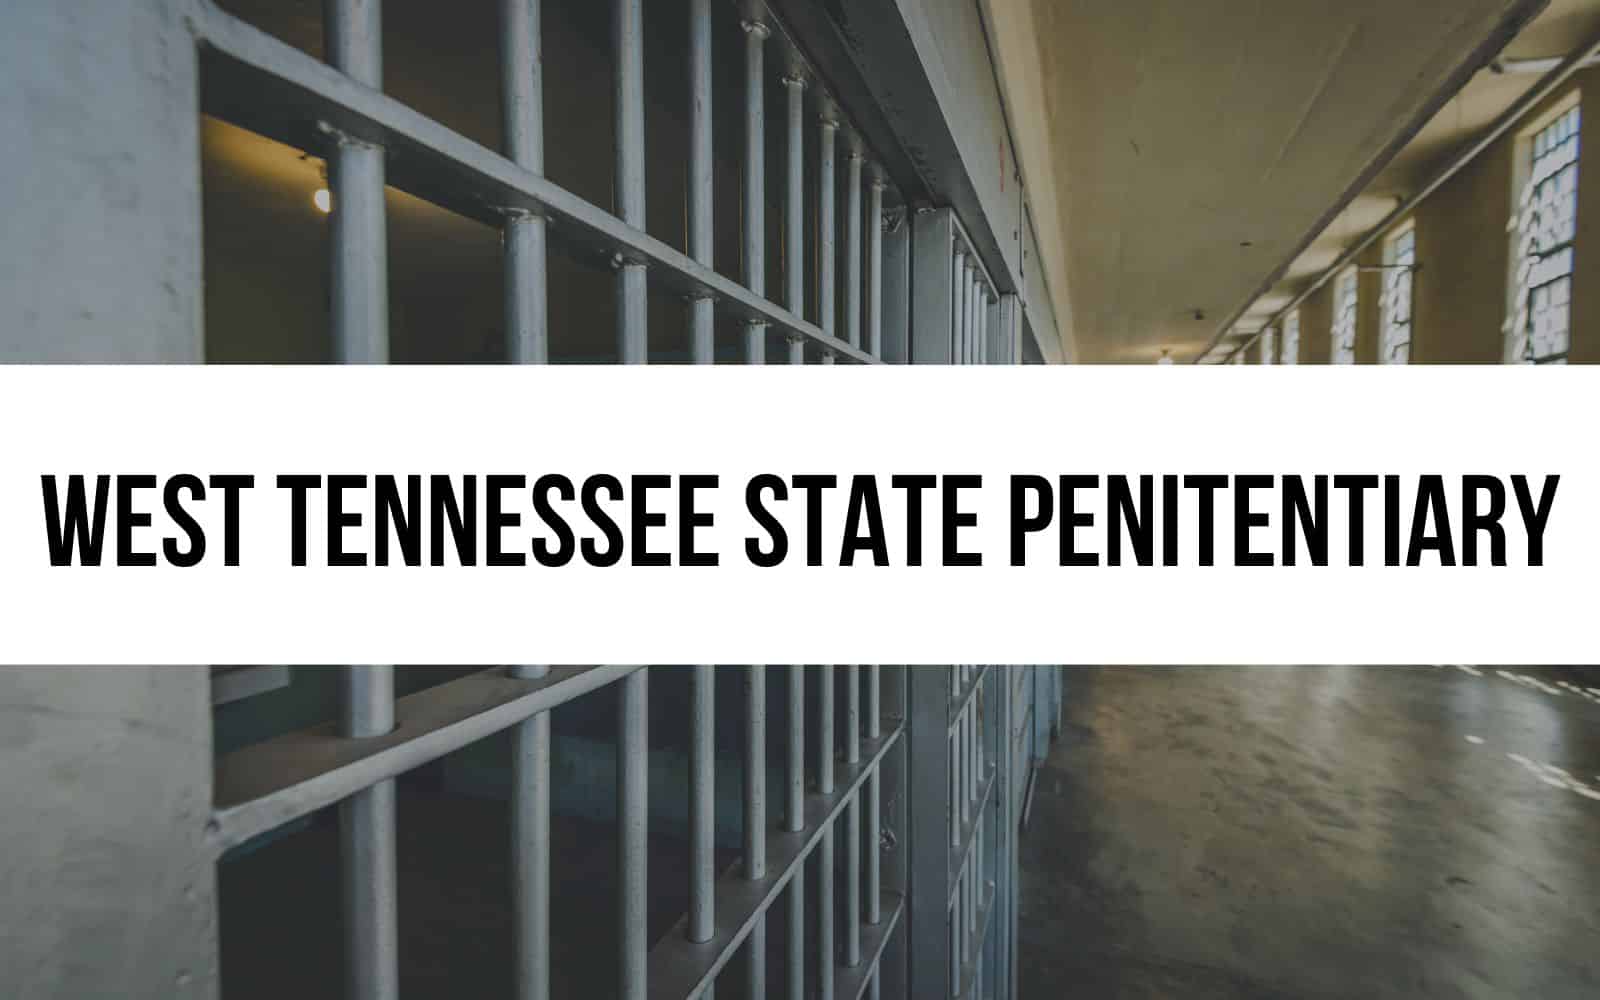 West Tennessee State Penitentiary